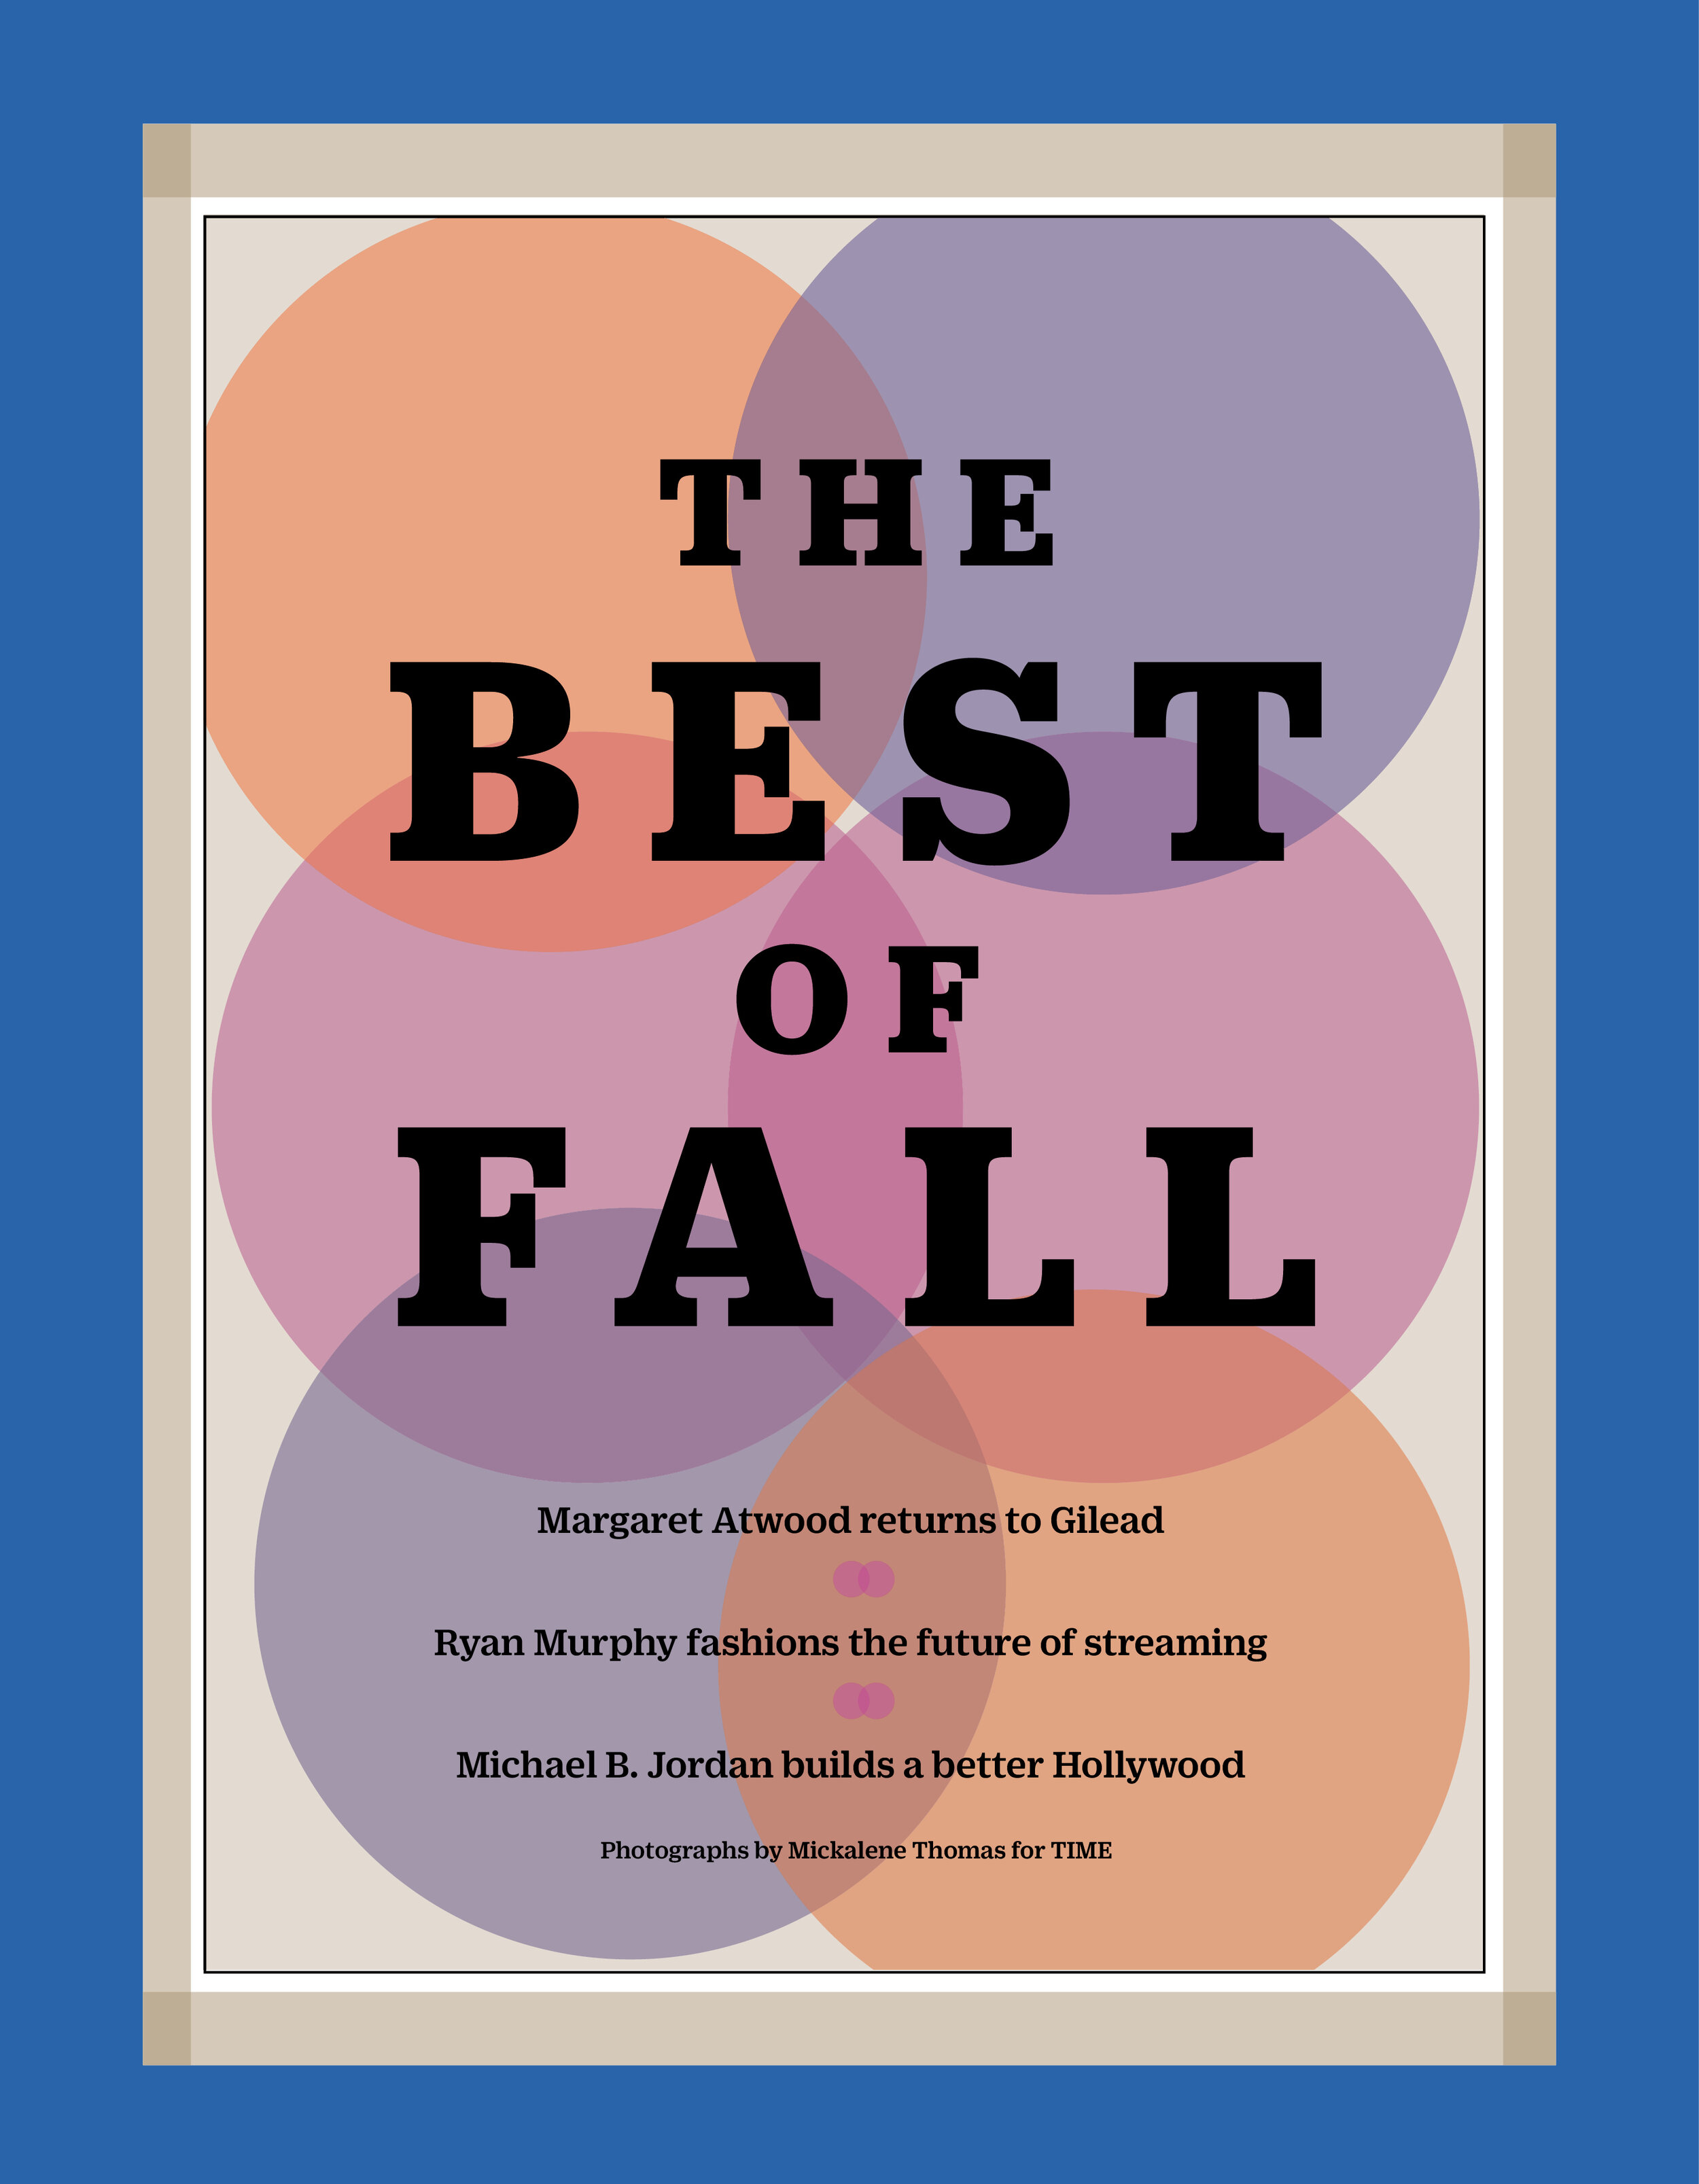 The Best of Fall, 2019